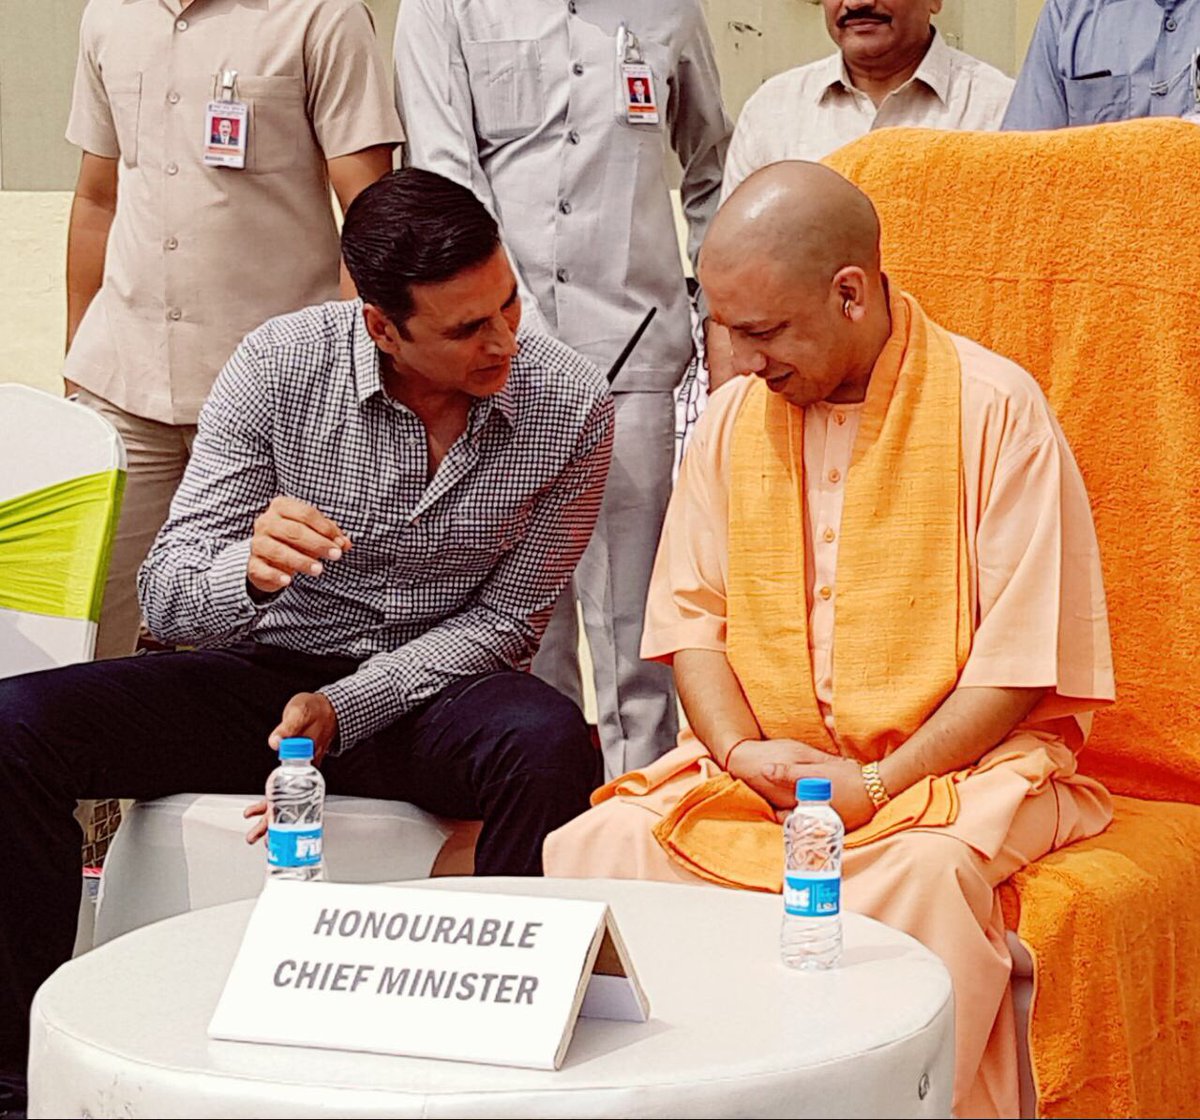 Akshay cleanliness drive in Lucknow with CM Yogi